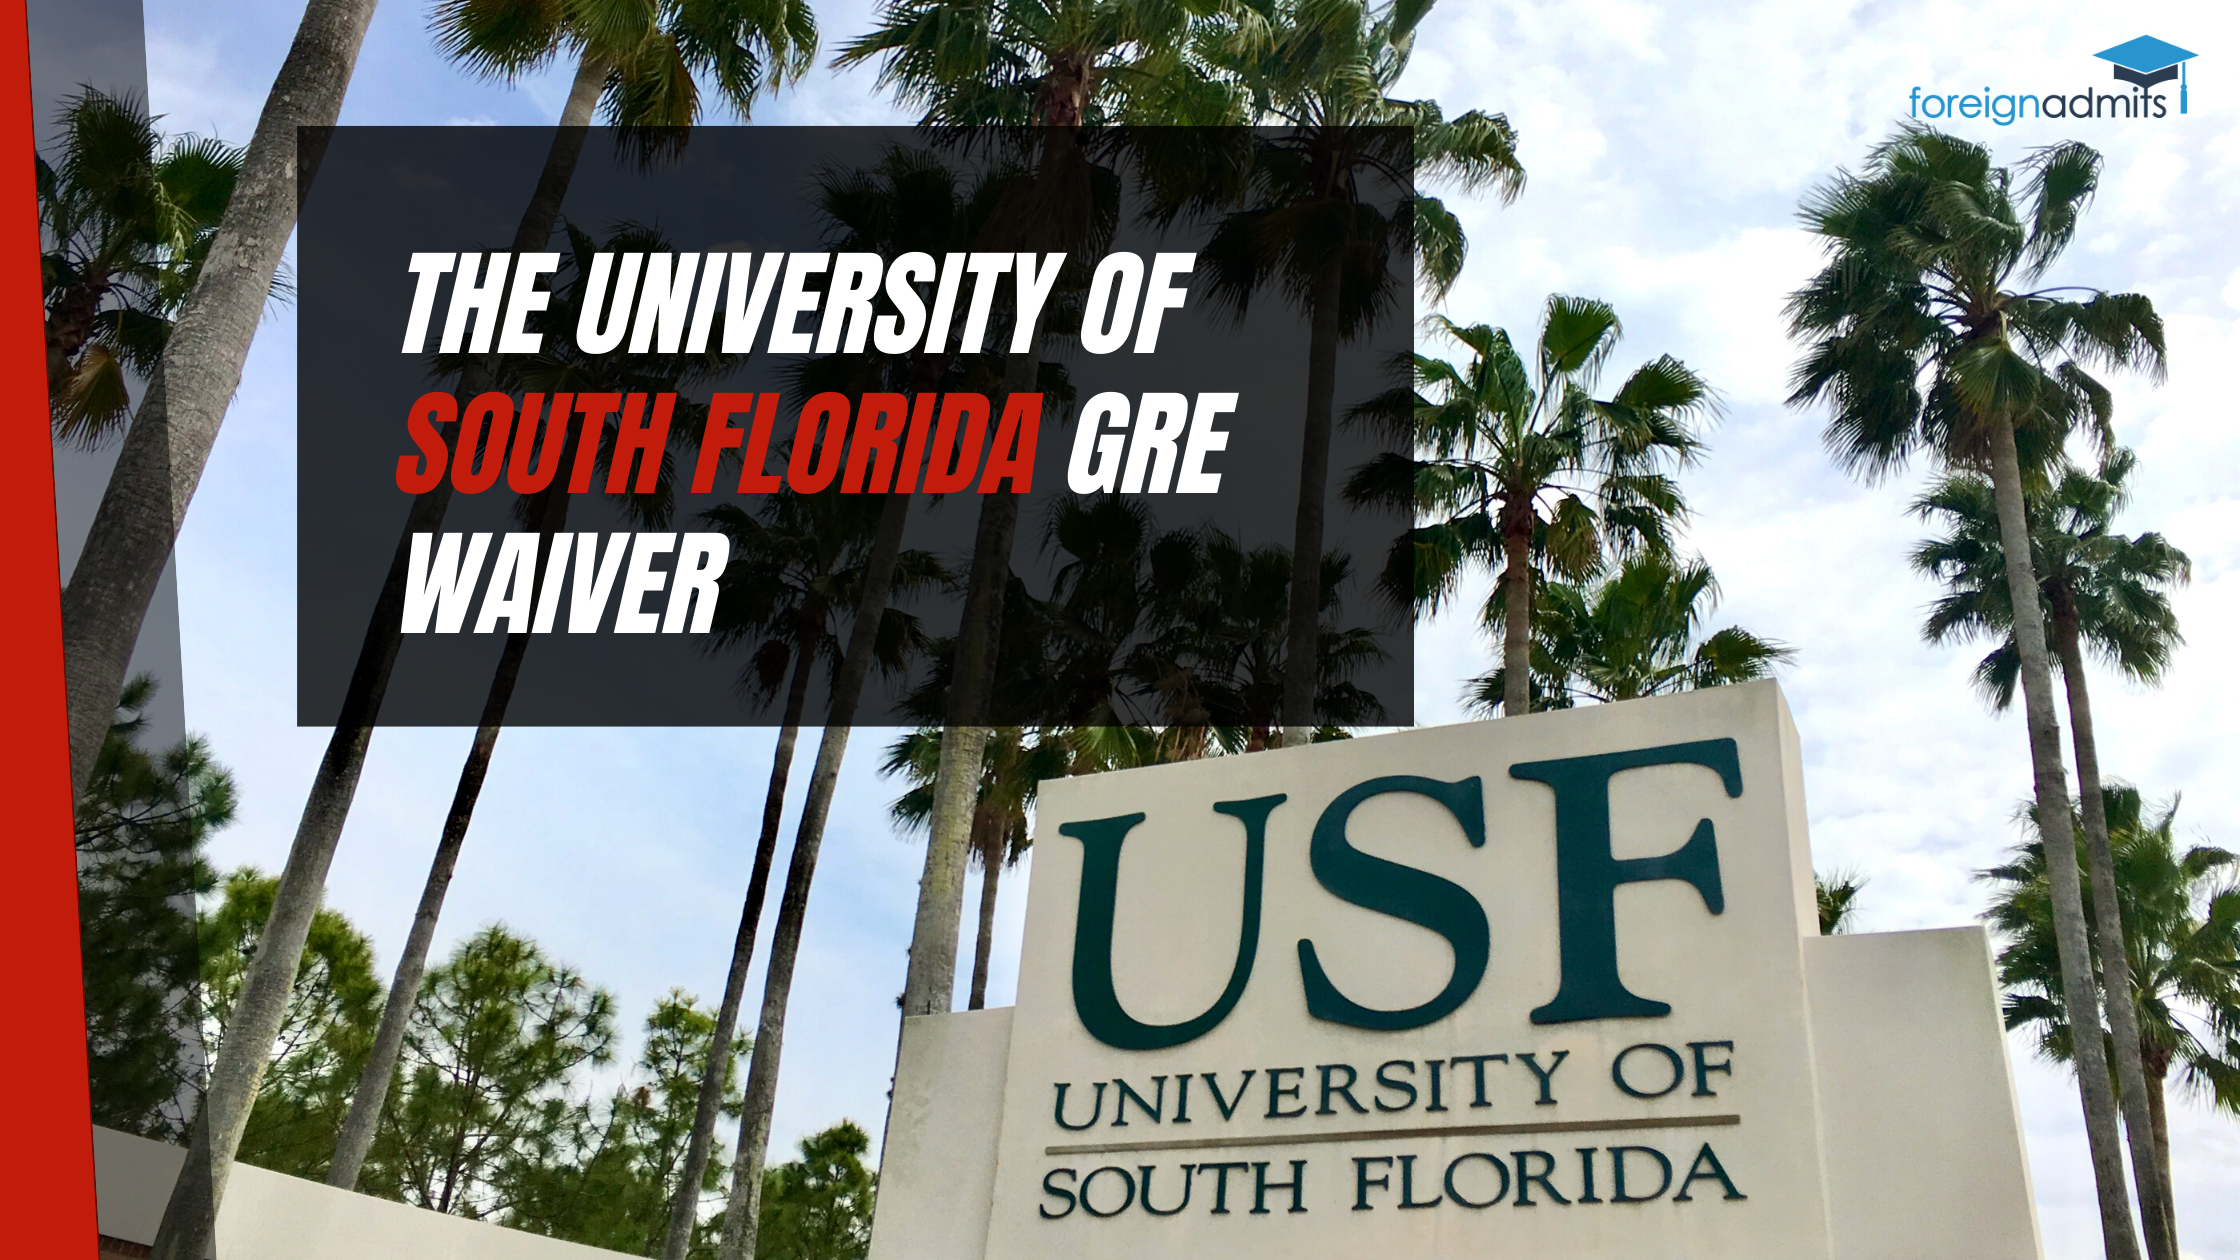 The University of South Florida GRE waiver